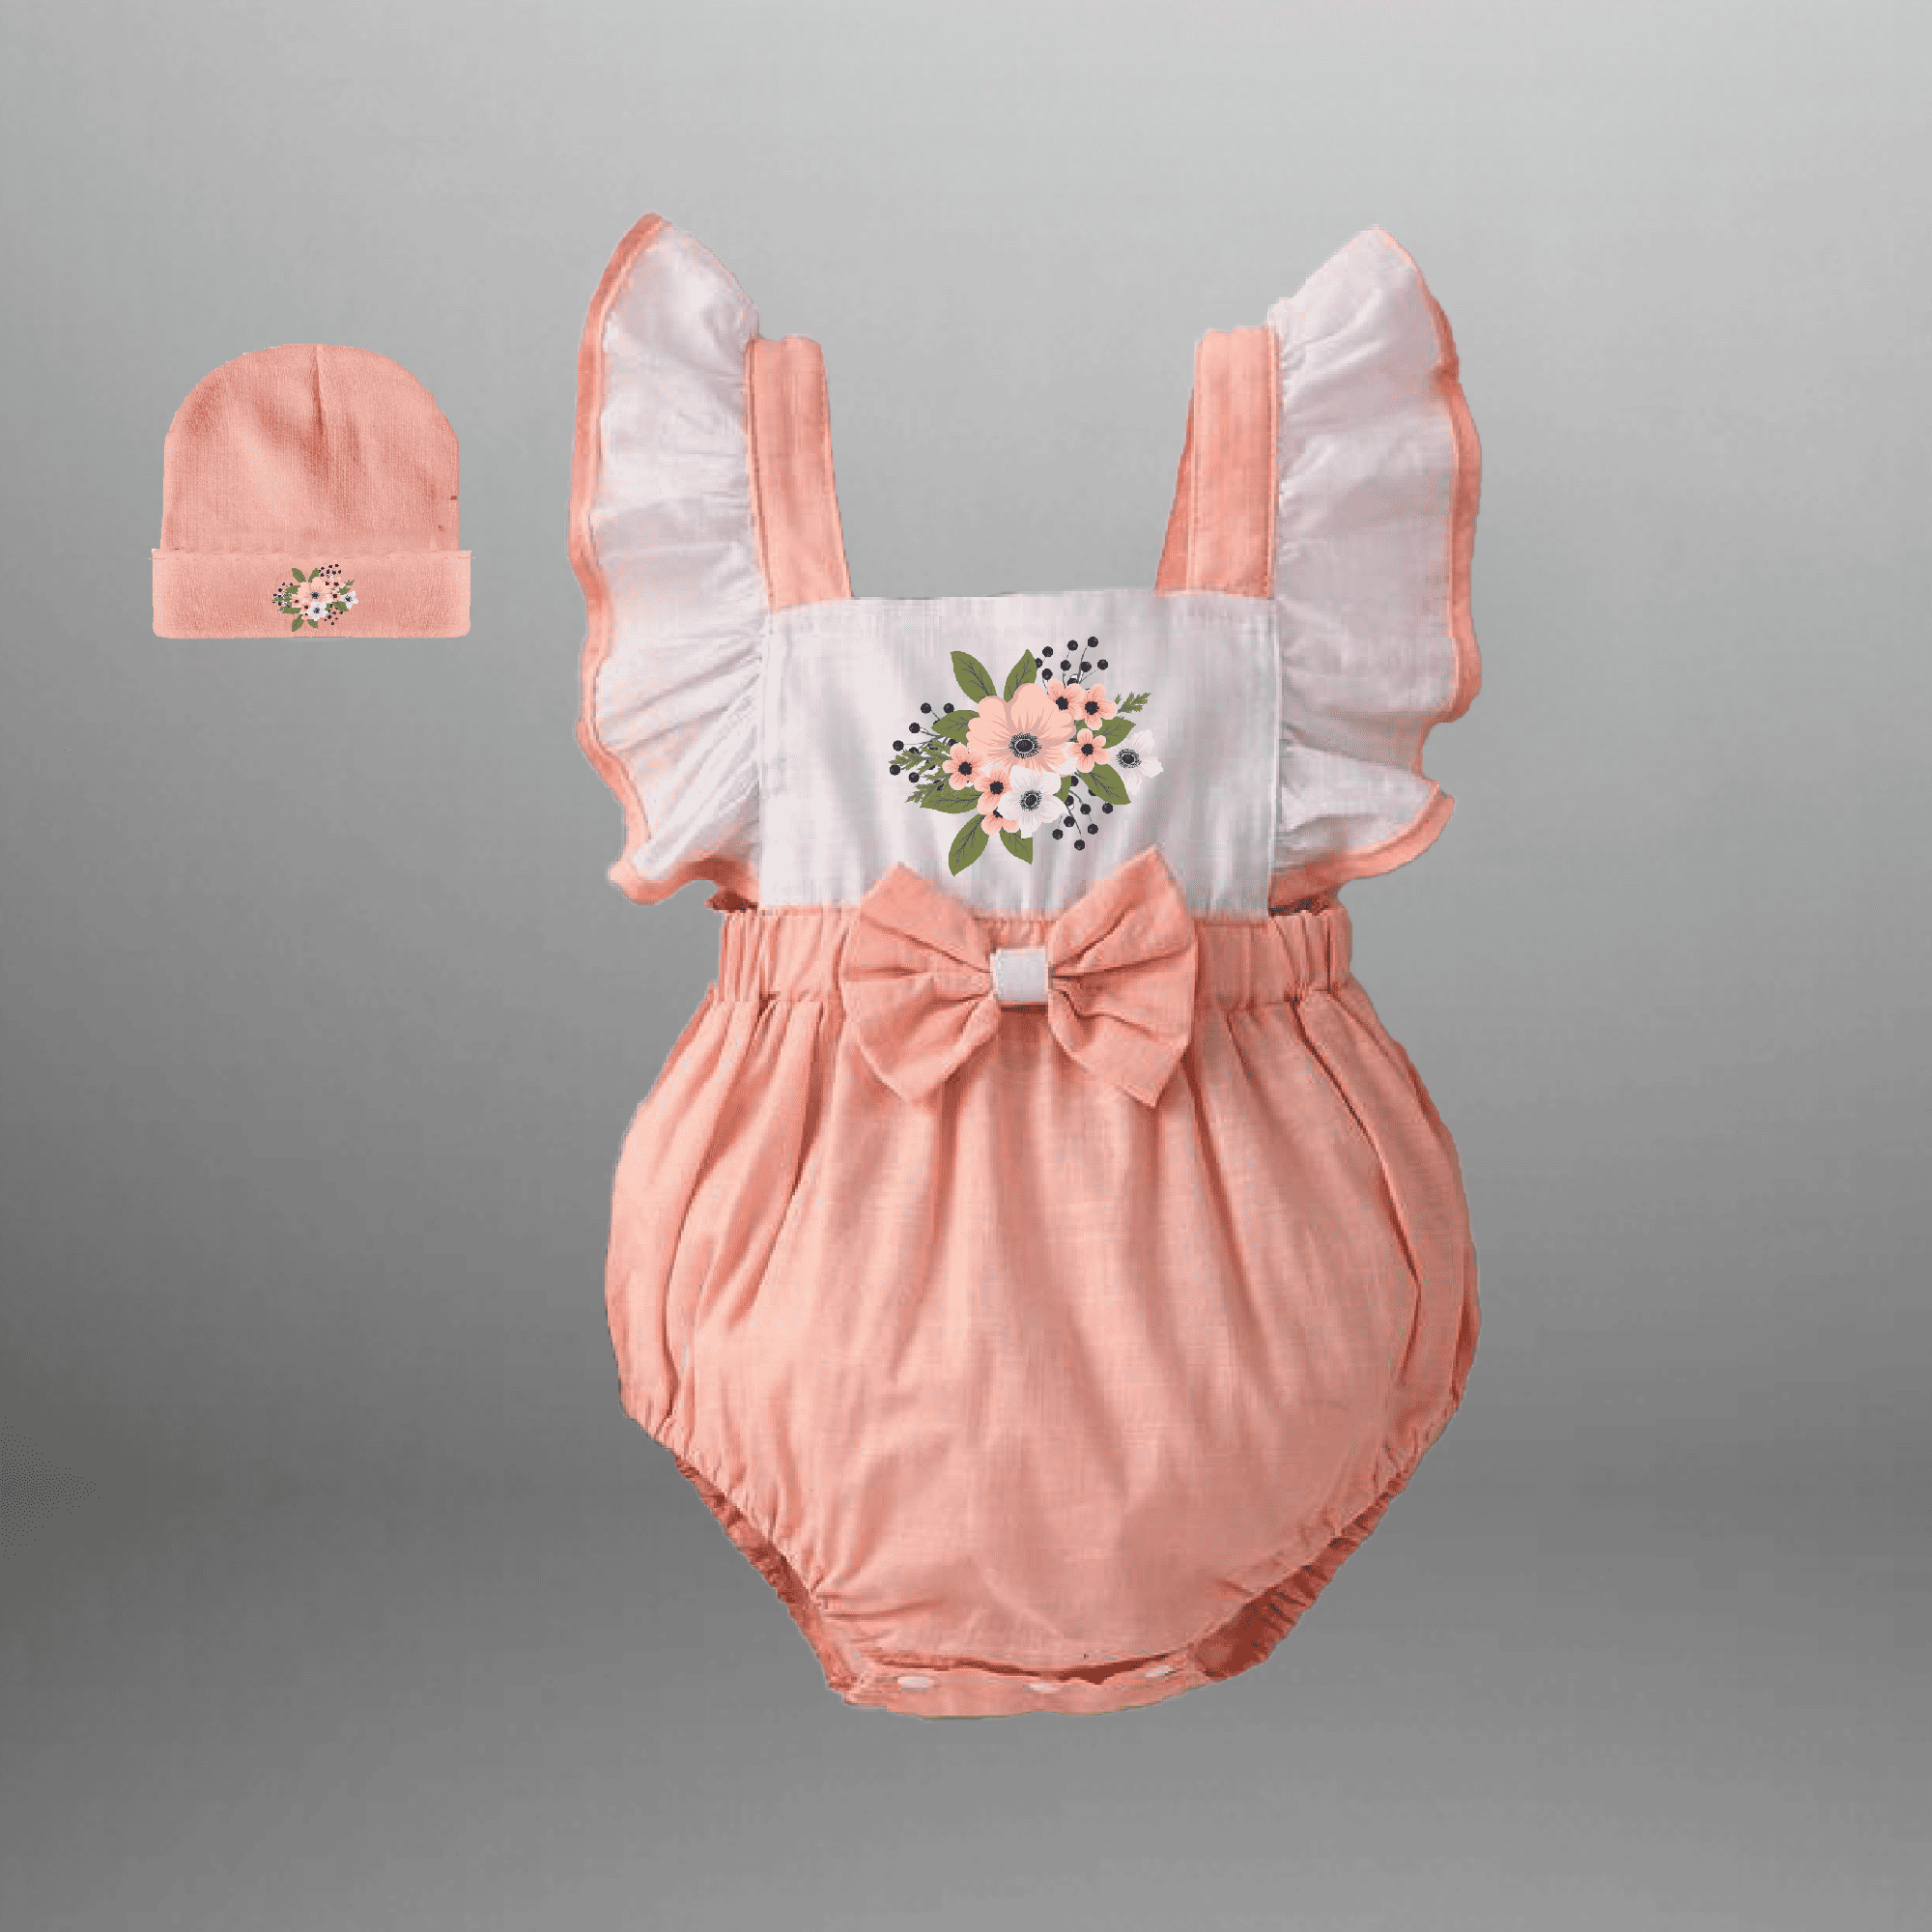 Baby girl's cute Peach & white romper with a baby hat-RKFCTT090